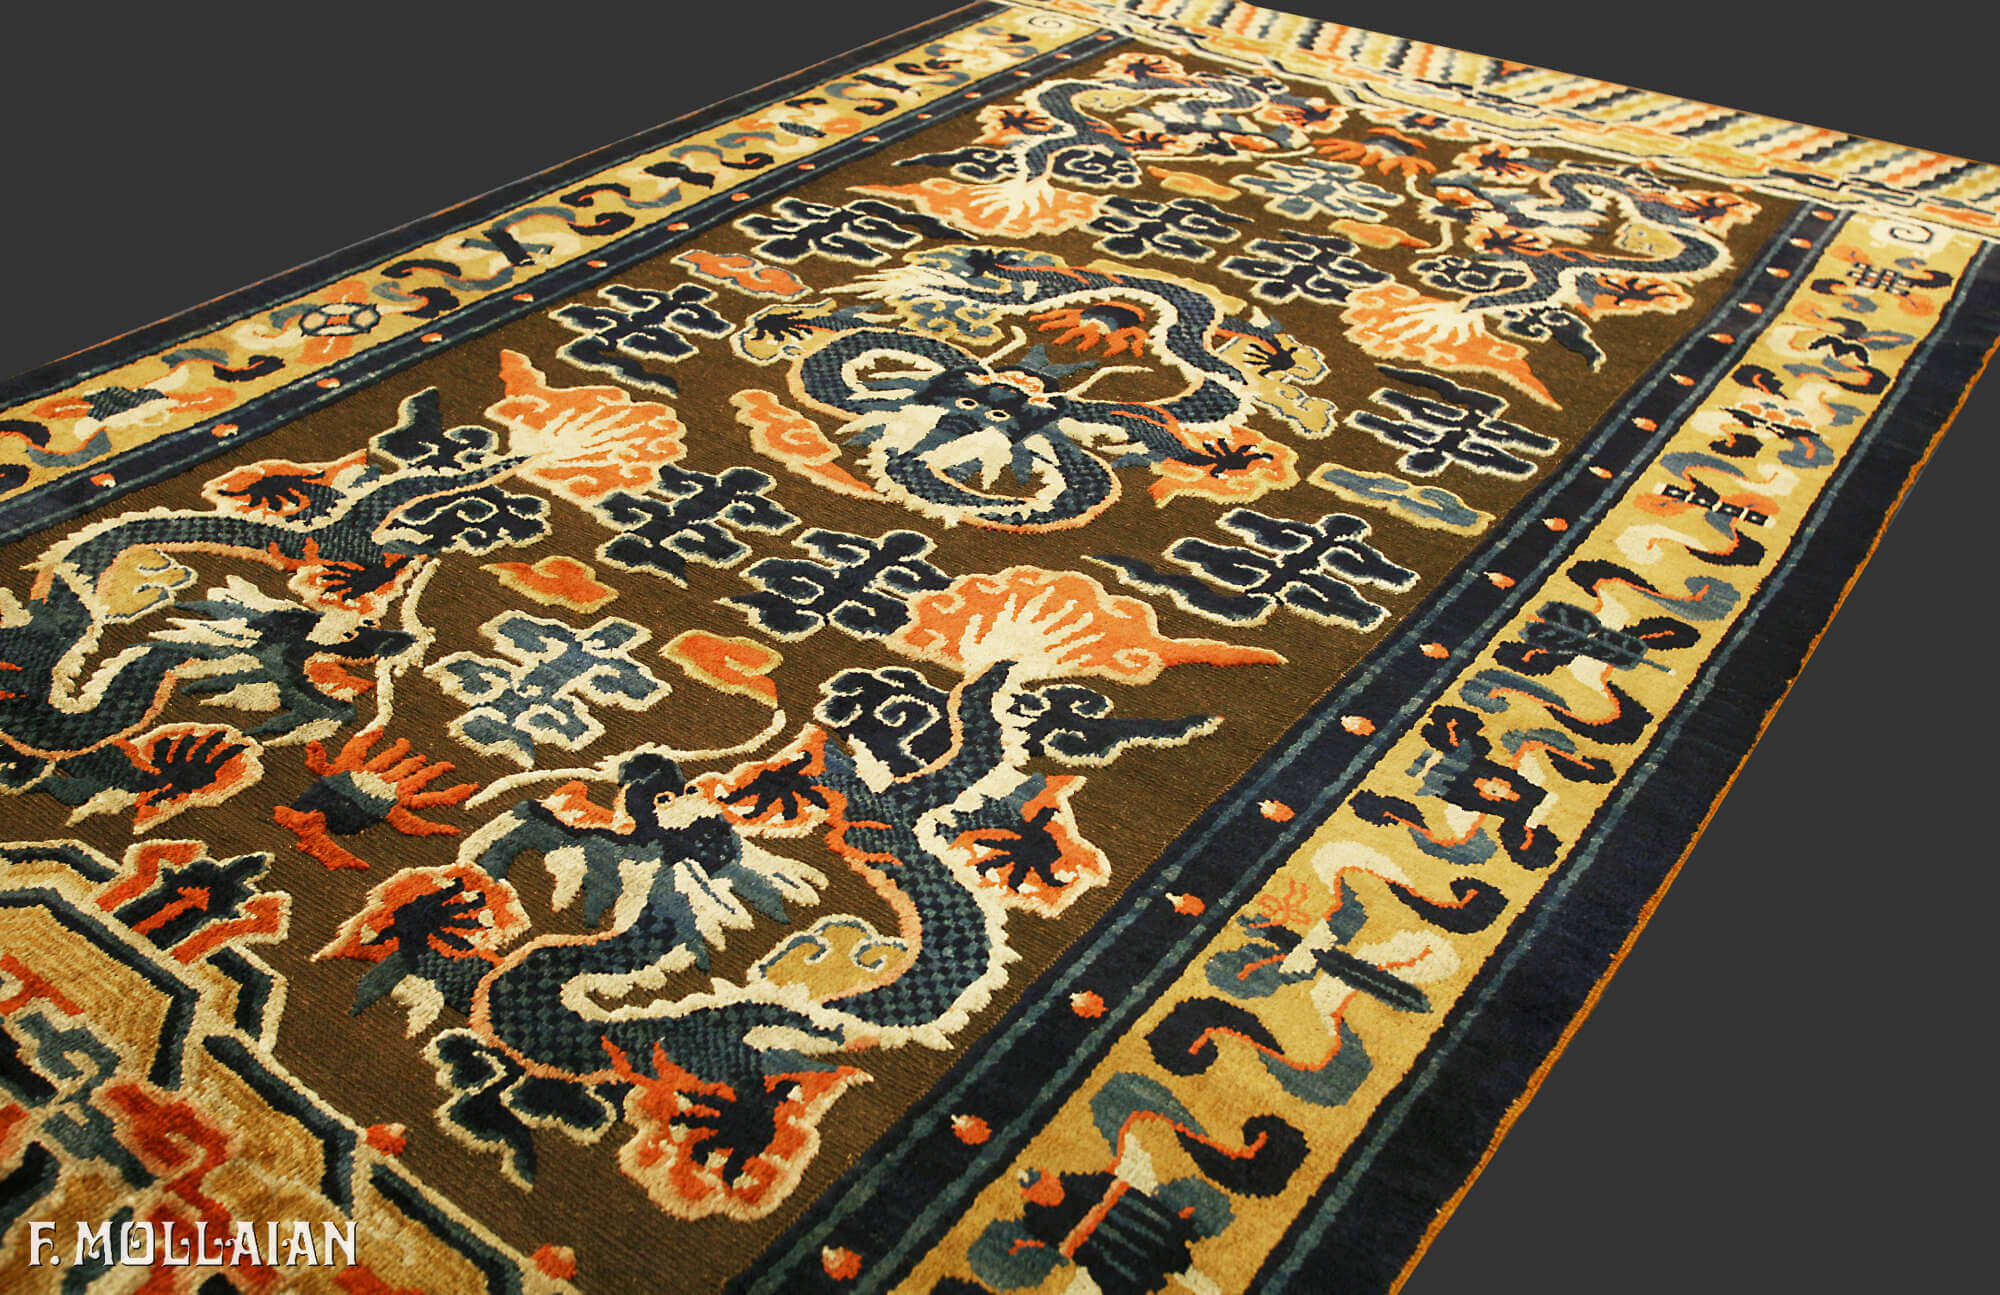 Antique Ningxia Metal-Thread Imperial Palace Souf Chinese Rug n°:95912367